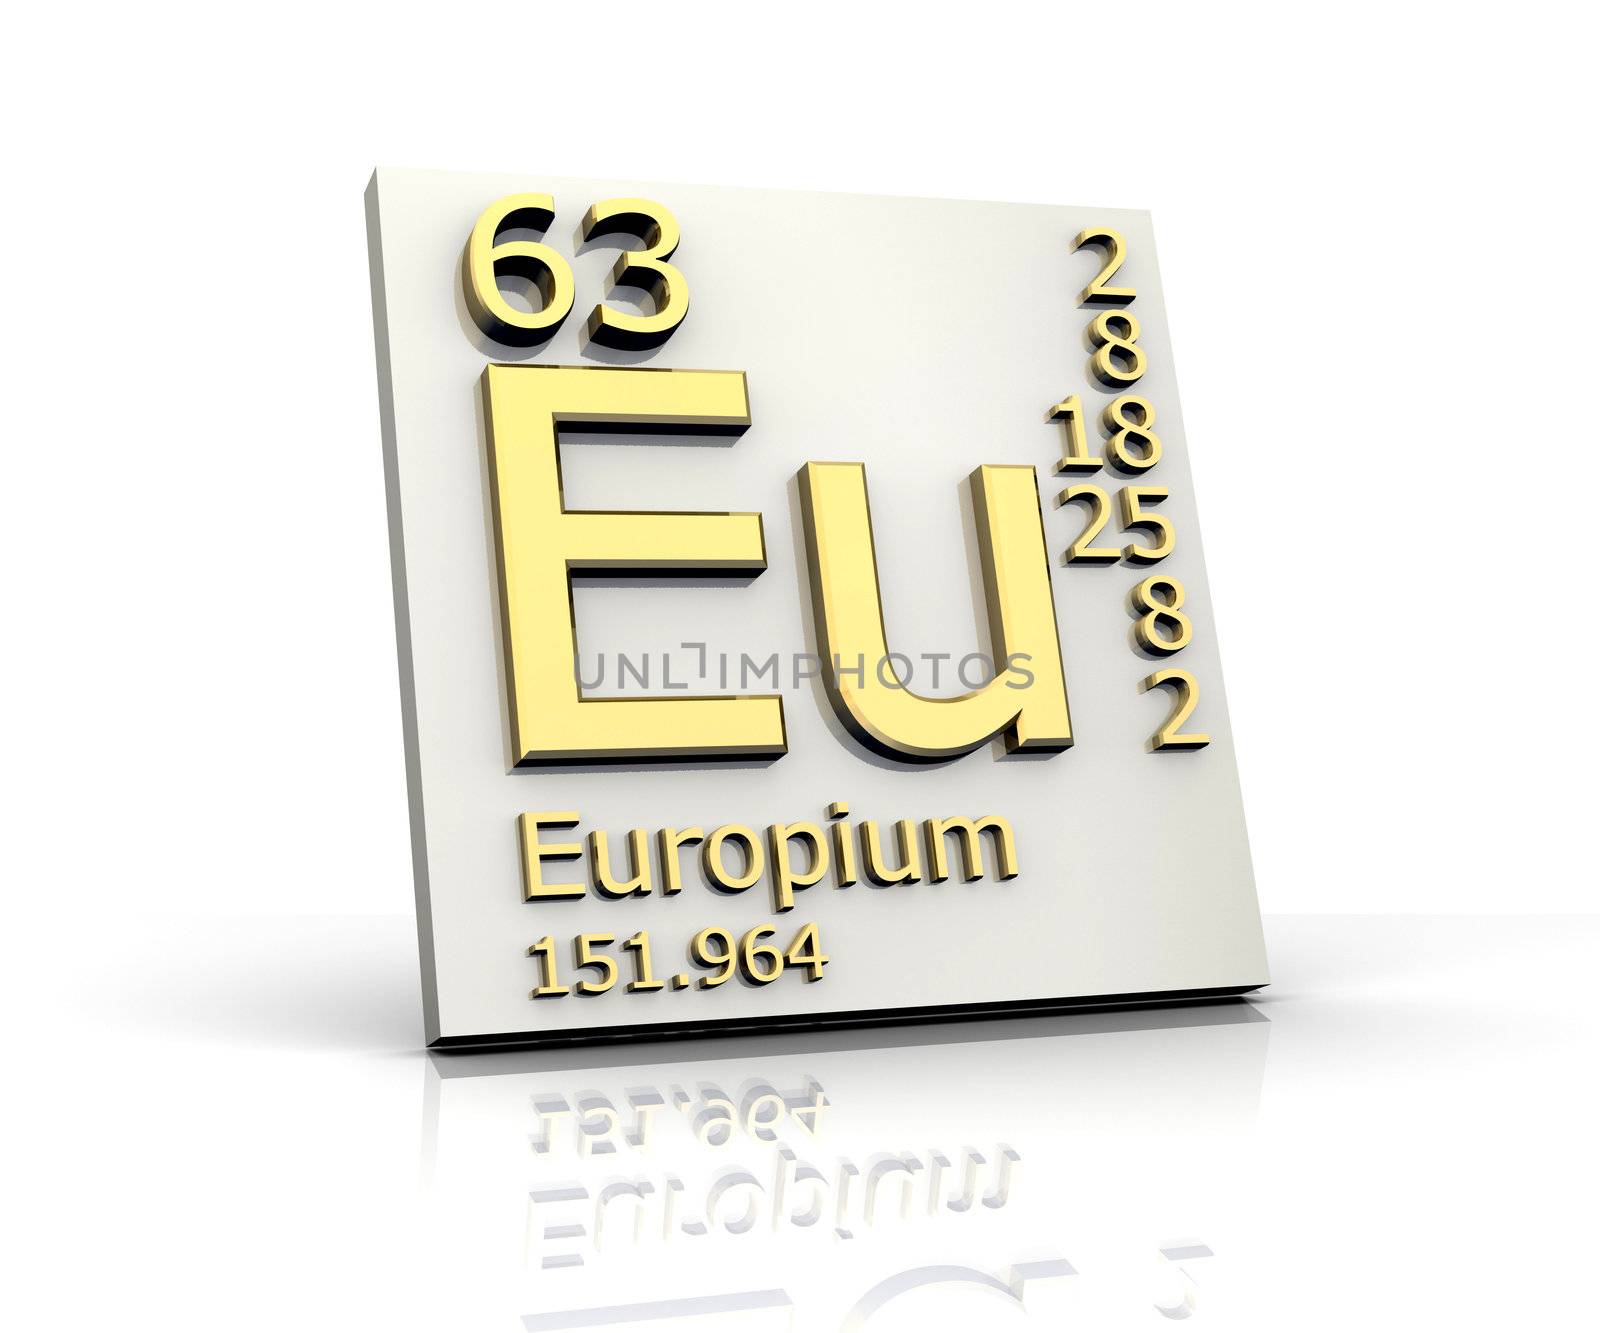 Europium form Periodic Table of Elements - 3d made